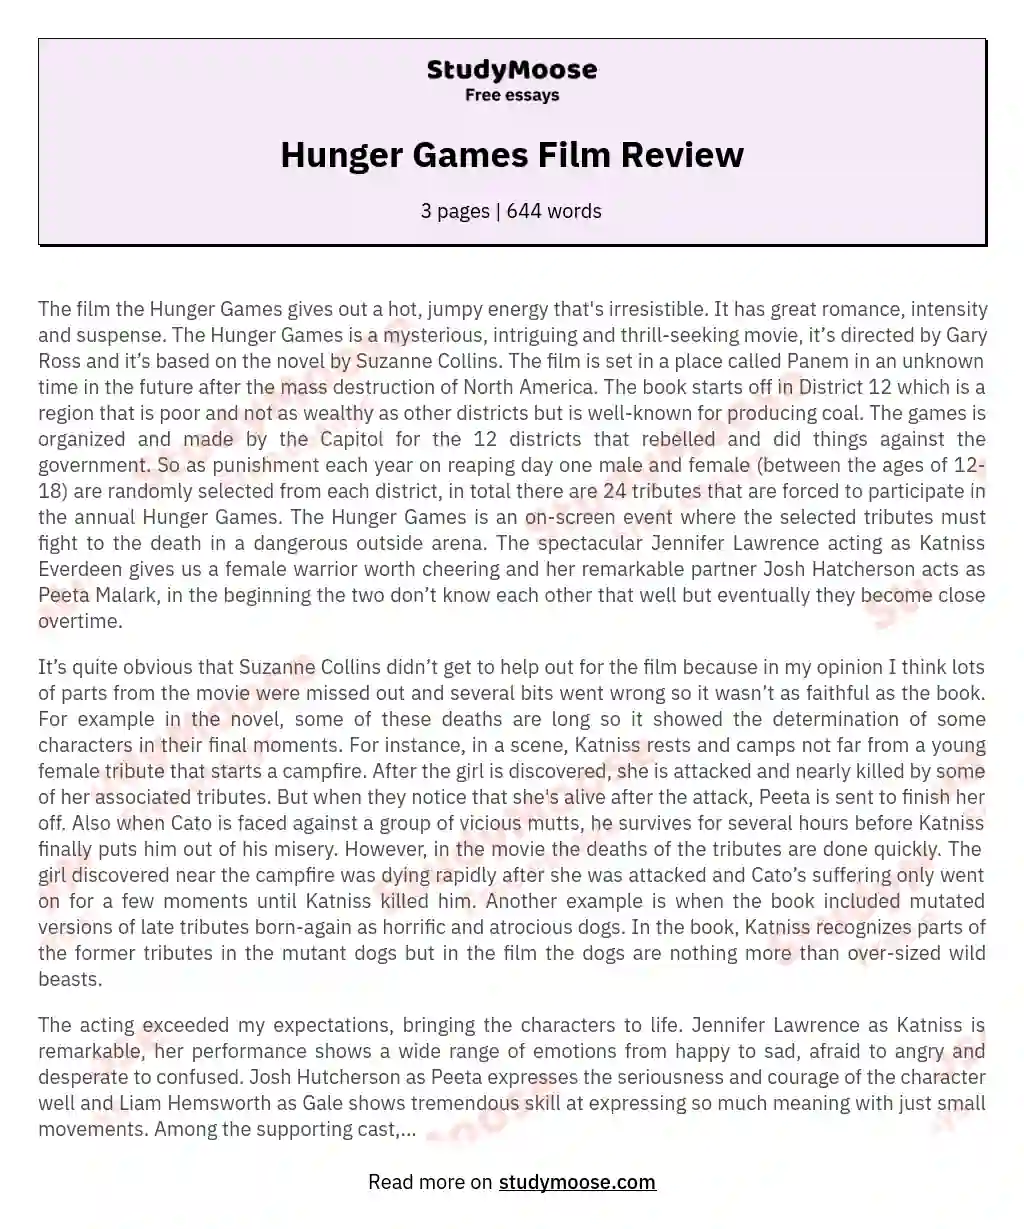 the hunger games film review essay